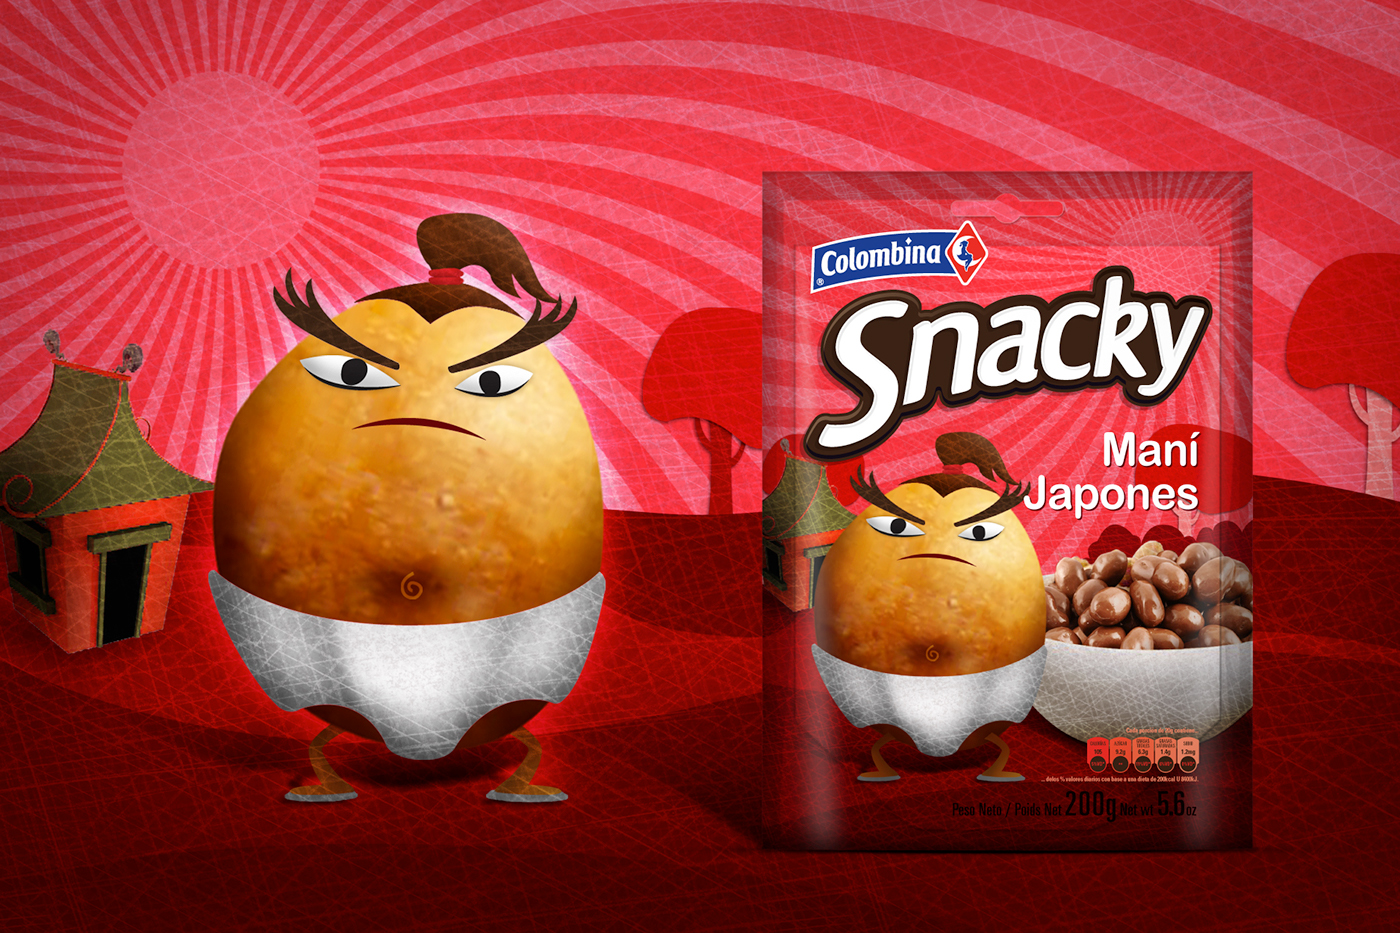 Character characters snacky packaging design Characters Design flavors pack family personajes diseño de packaging ilustracion illustrations diye diego jimenez